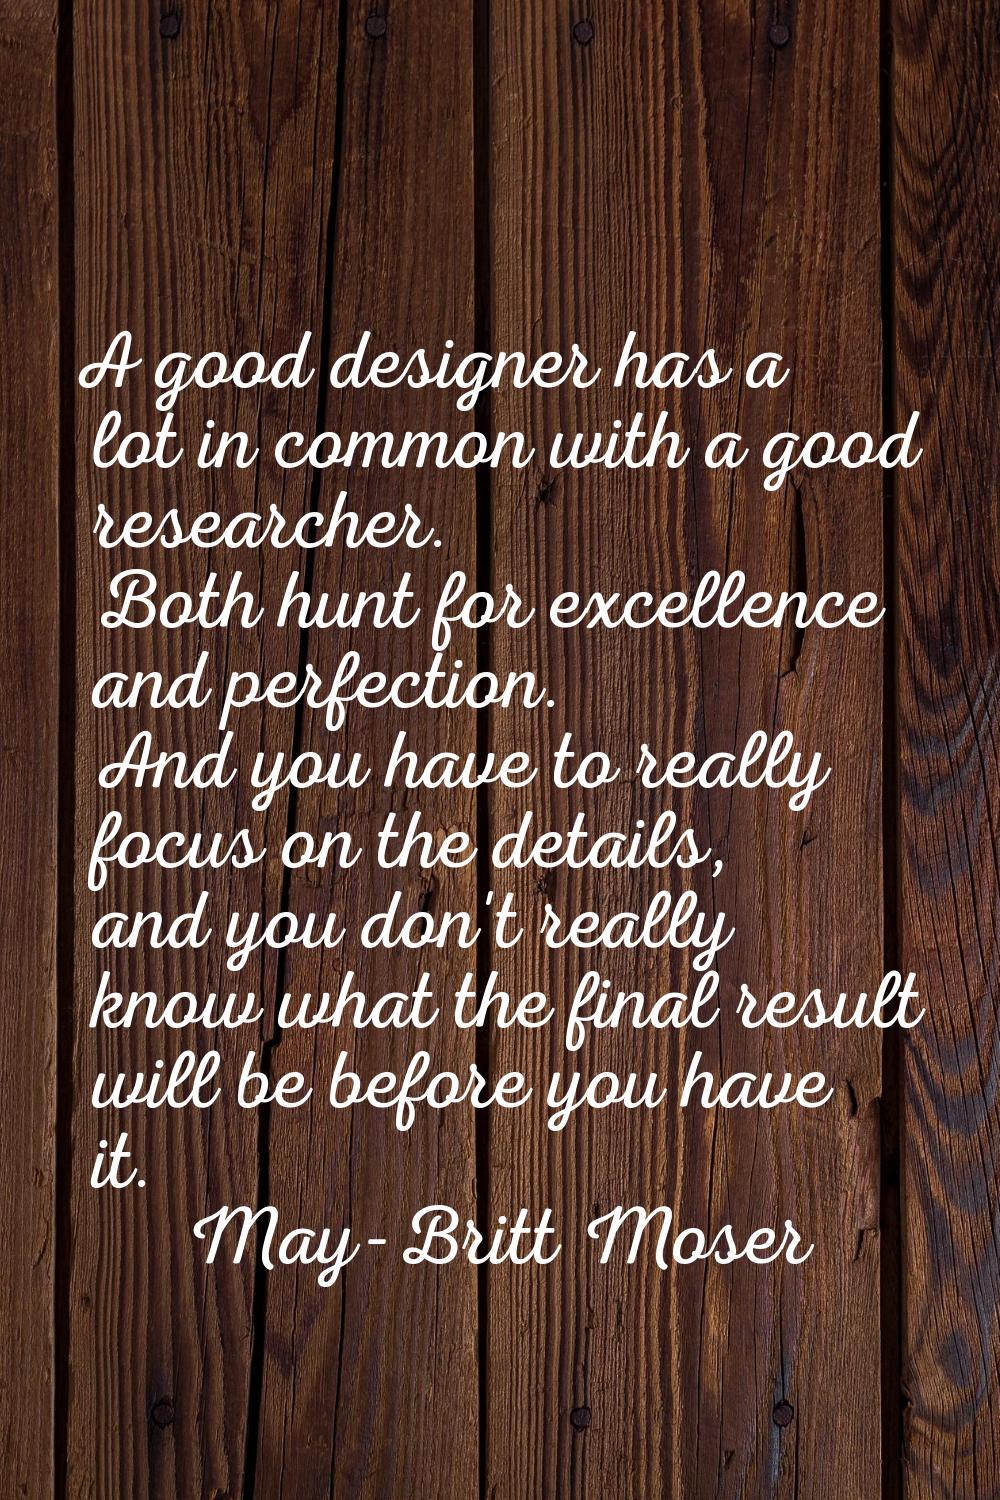 A good designer has a lot in common with a good researcher. Both hunt for excellence and perfection